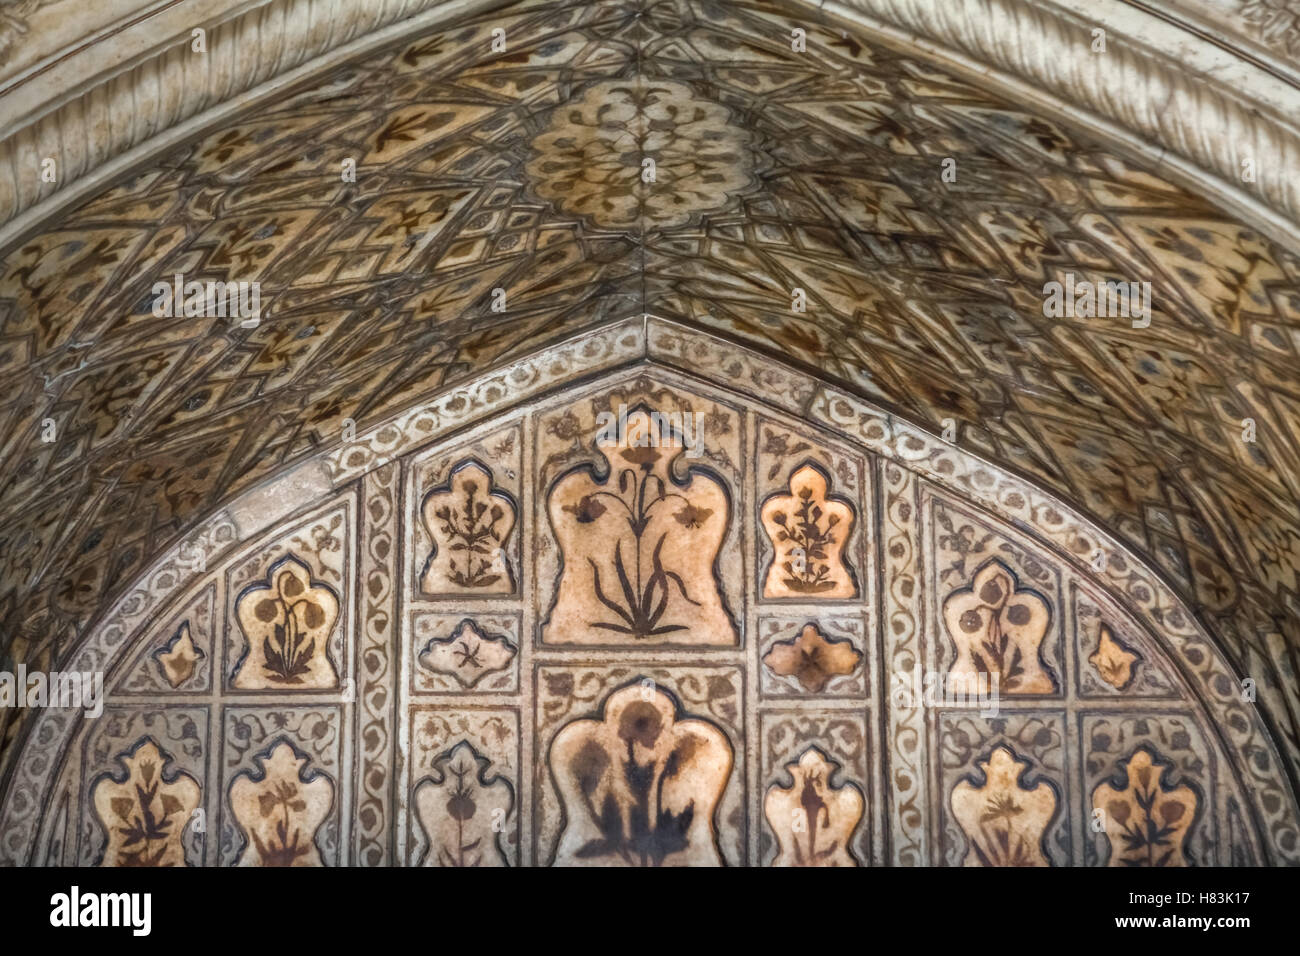 White marble ceilings decorated with floral motifs. Mughal architectural style at Khas Mahal Pavillon, Red Fort, Agra, Uttar Pradesh, India. Stock Photo